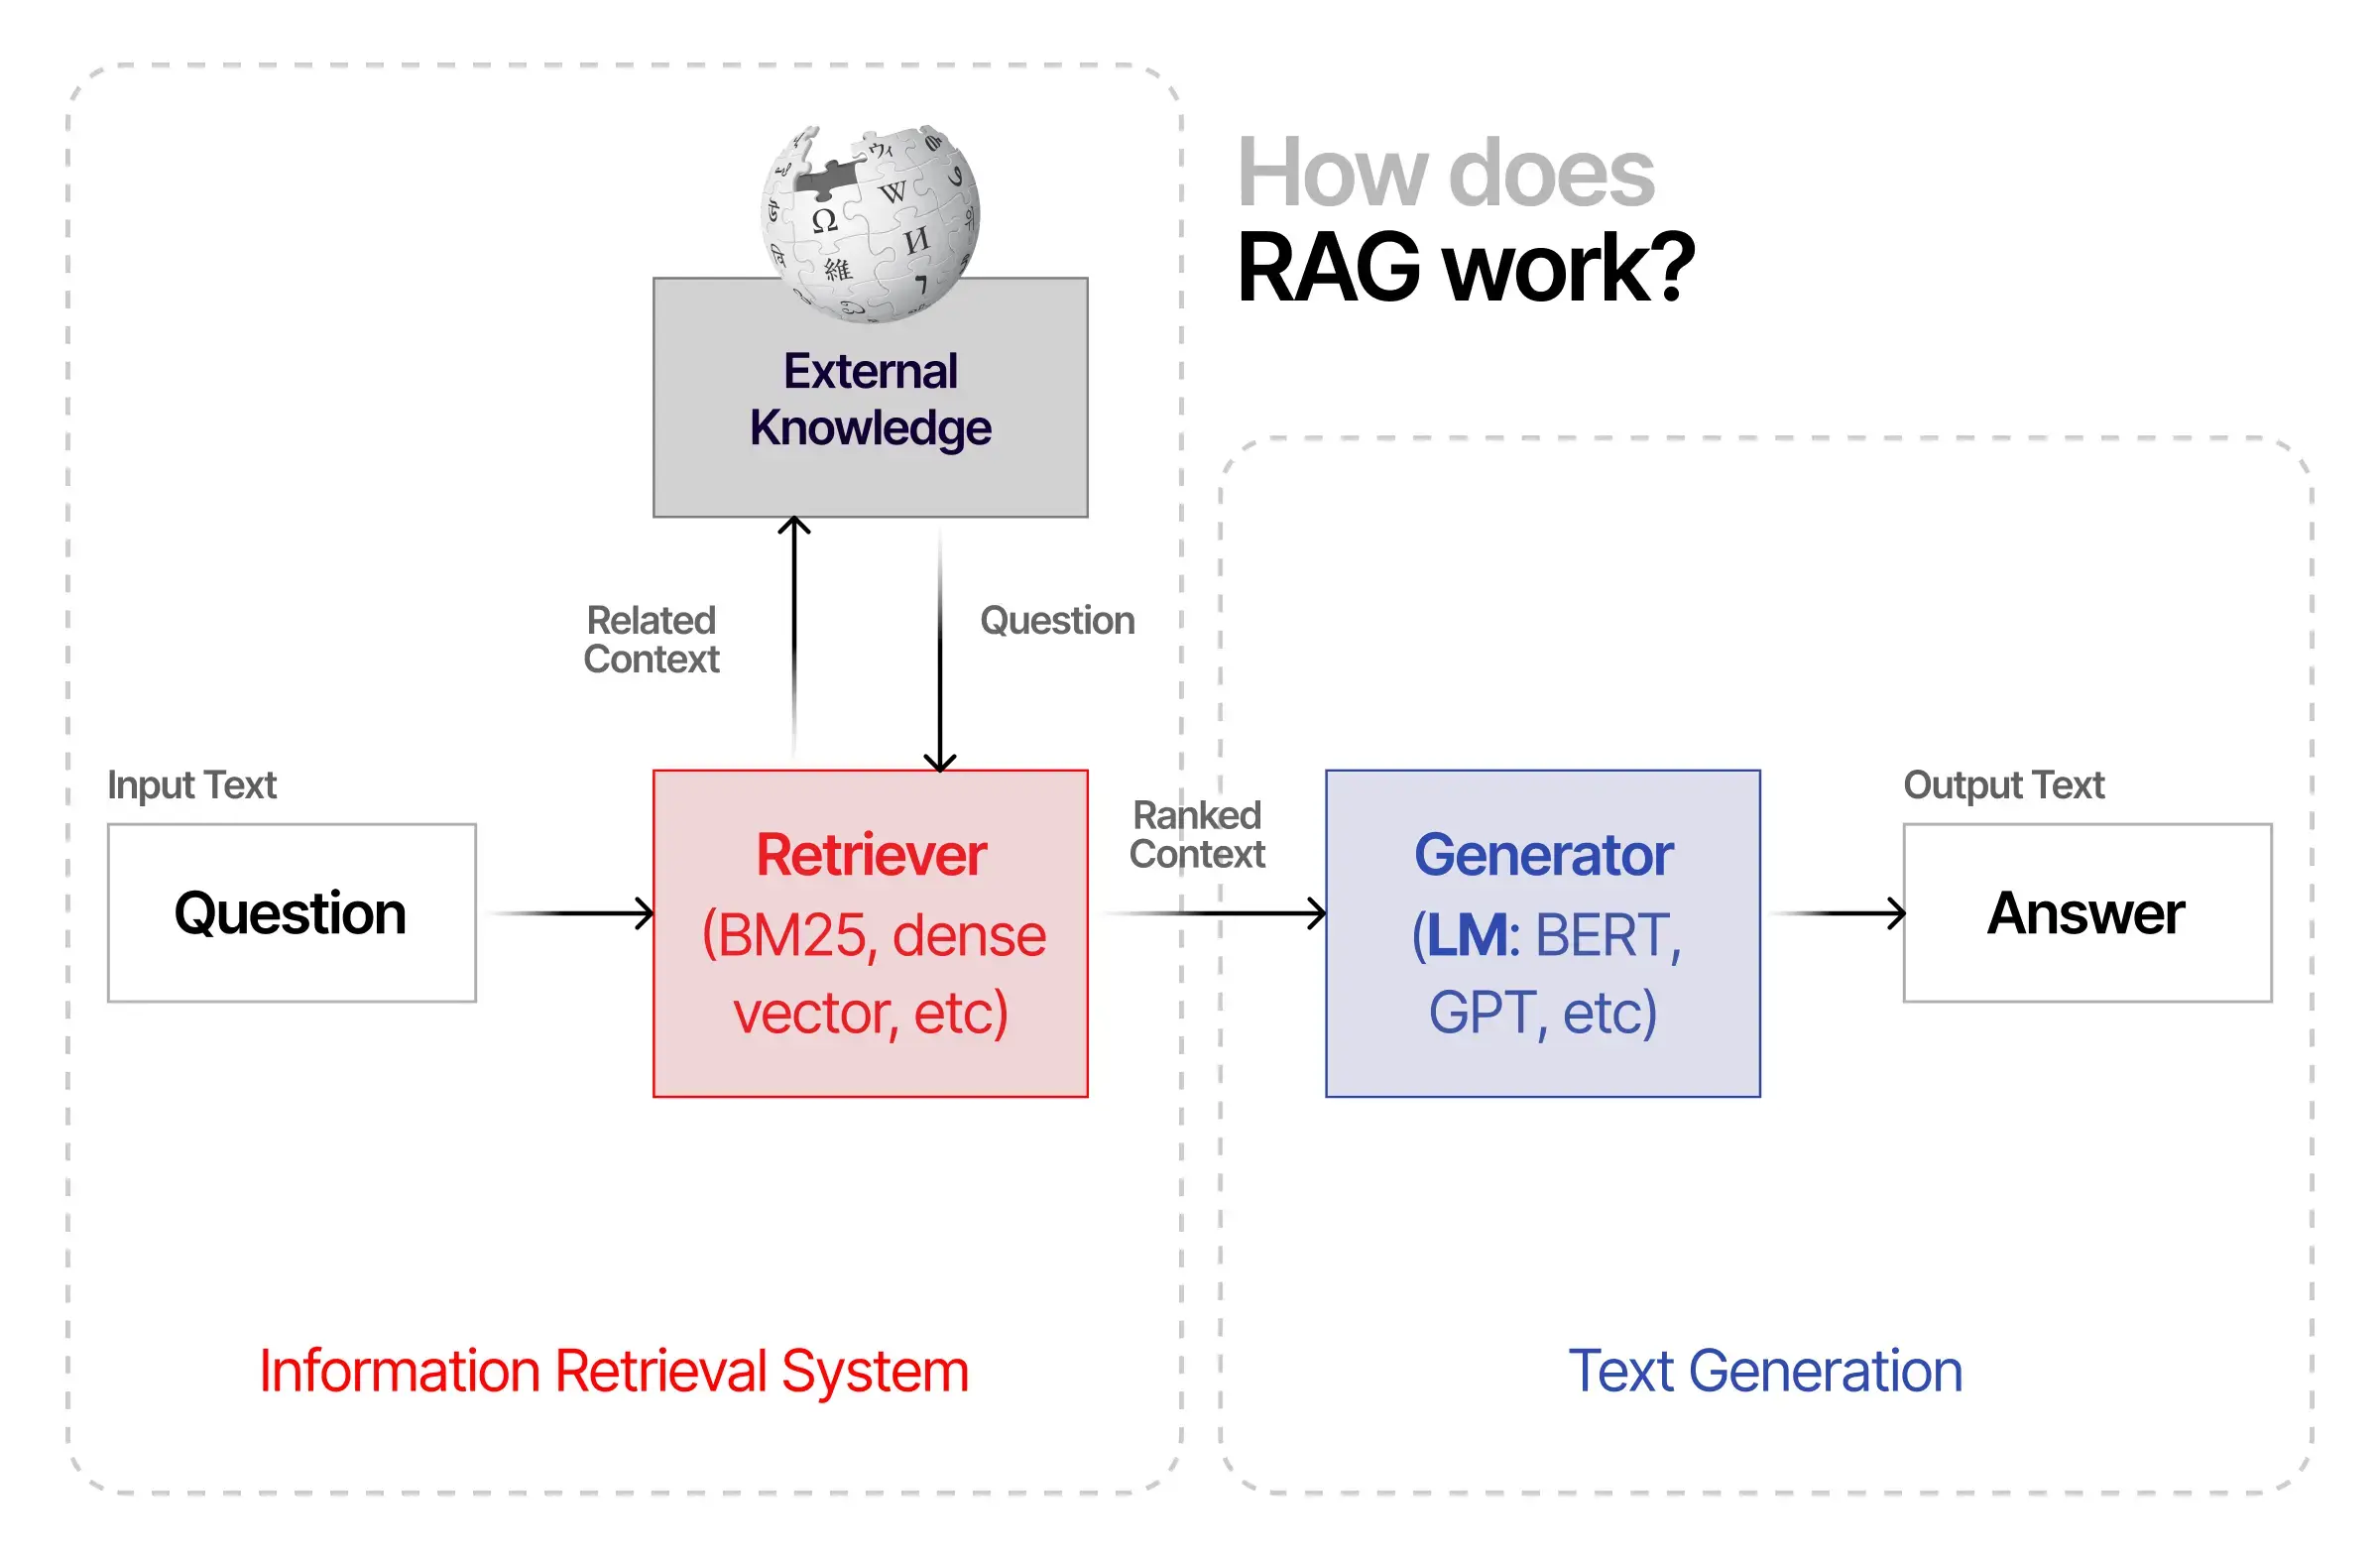 Revolutionizing Search with AI: RAG for Contextual Response